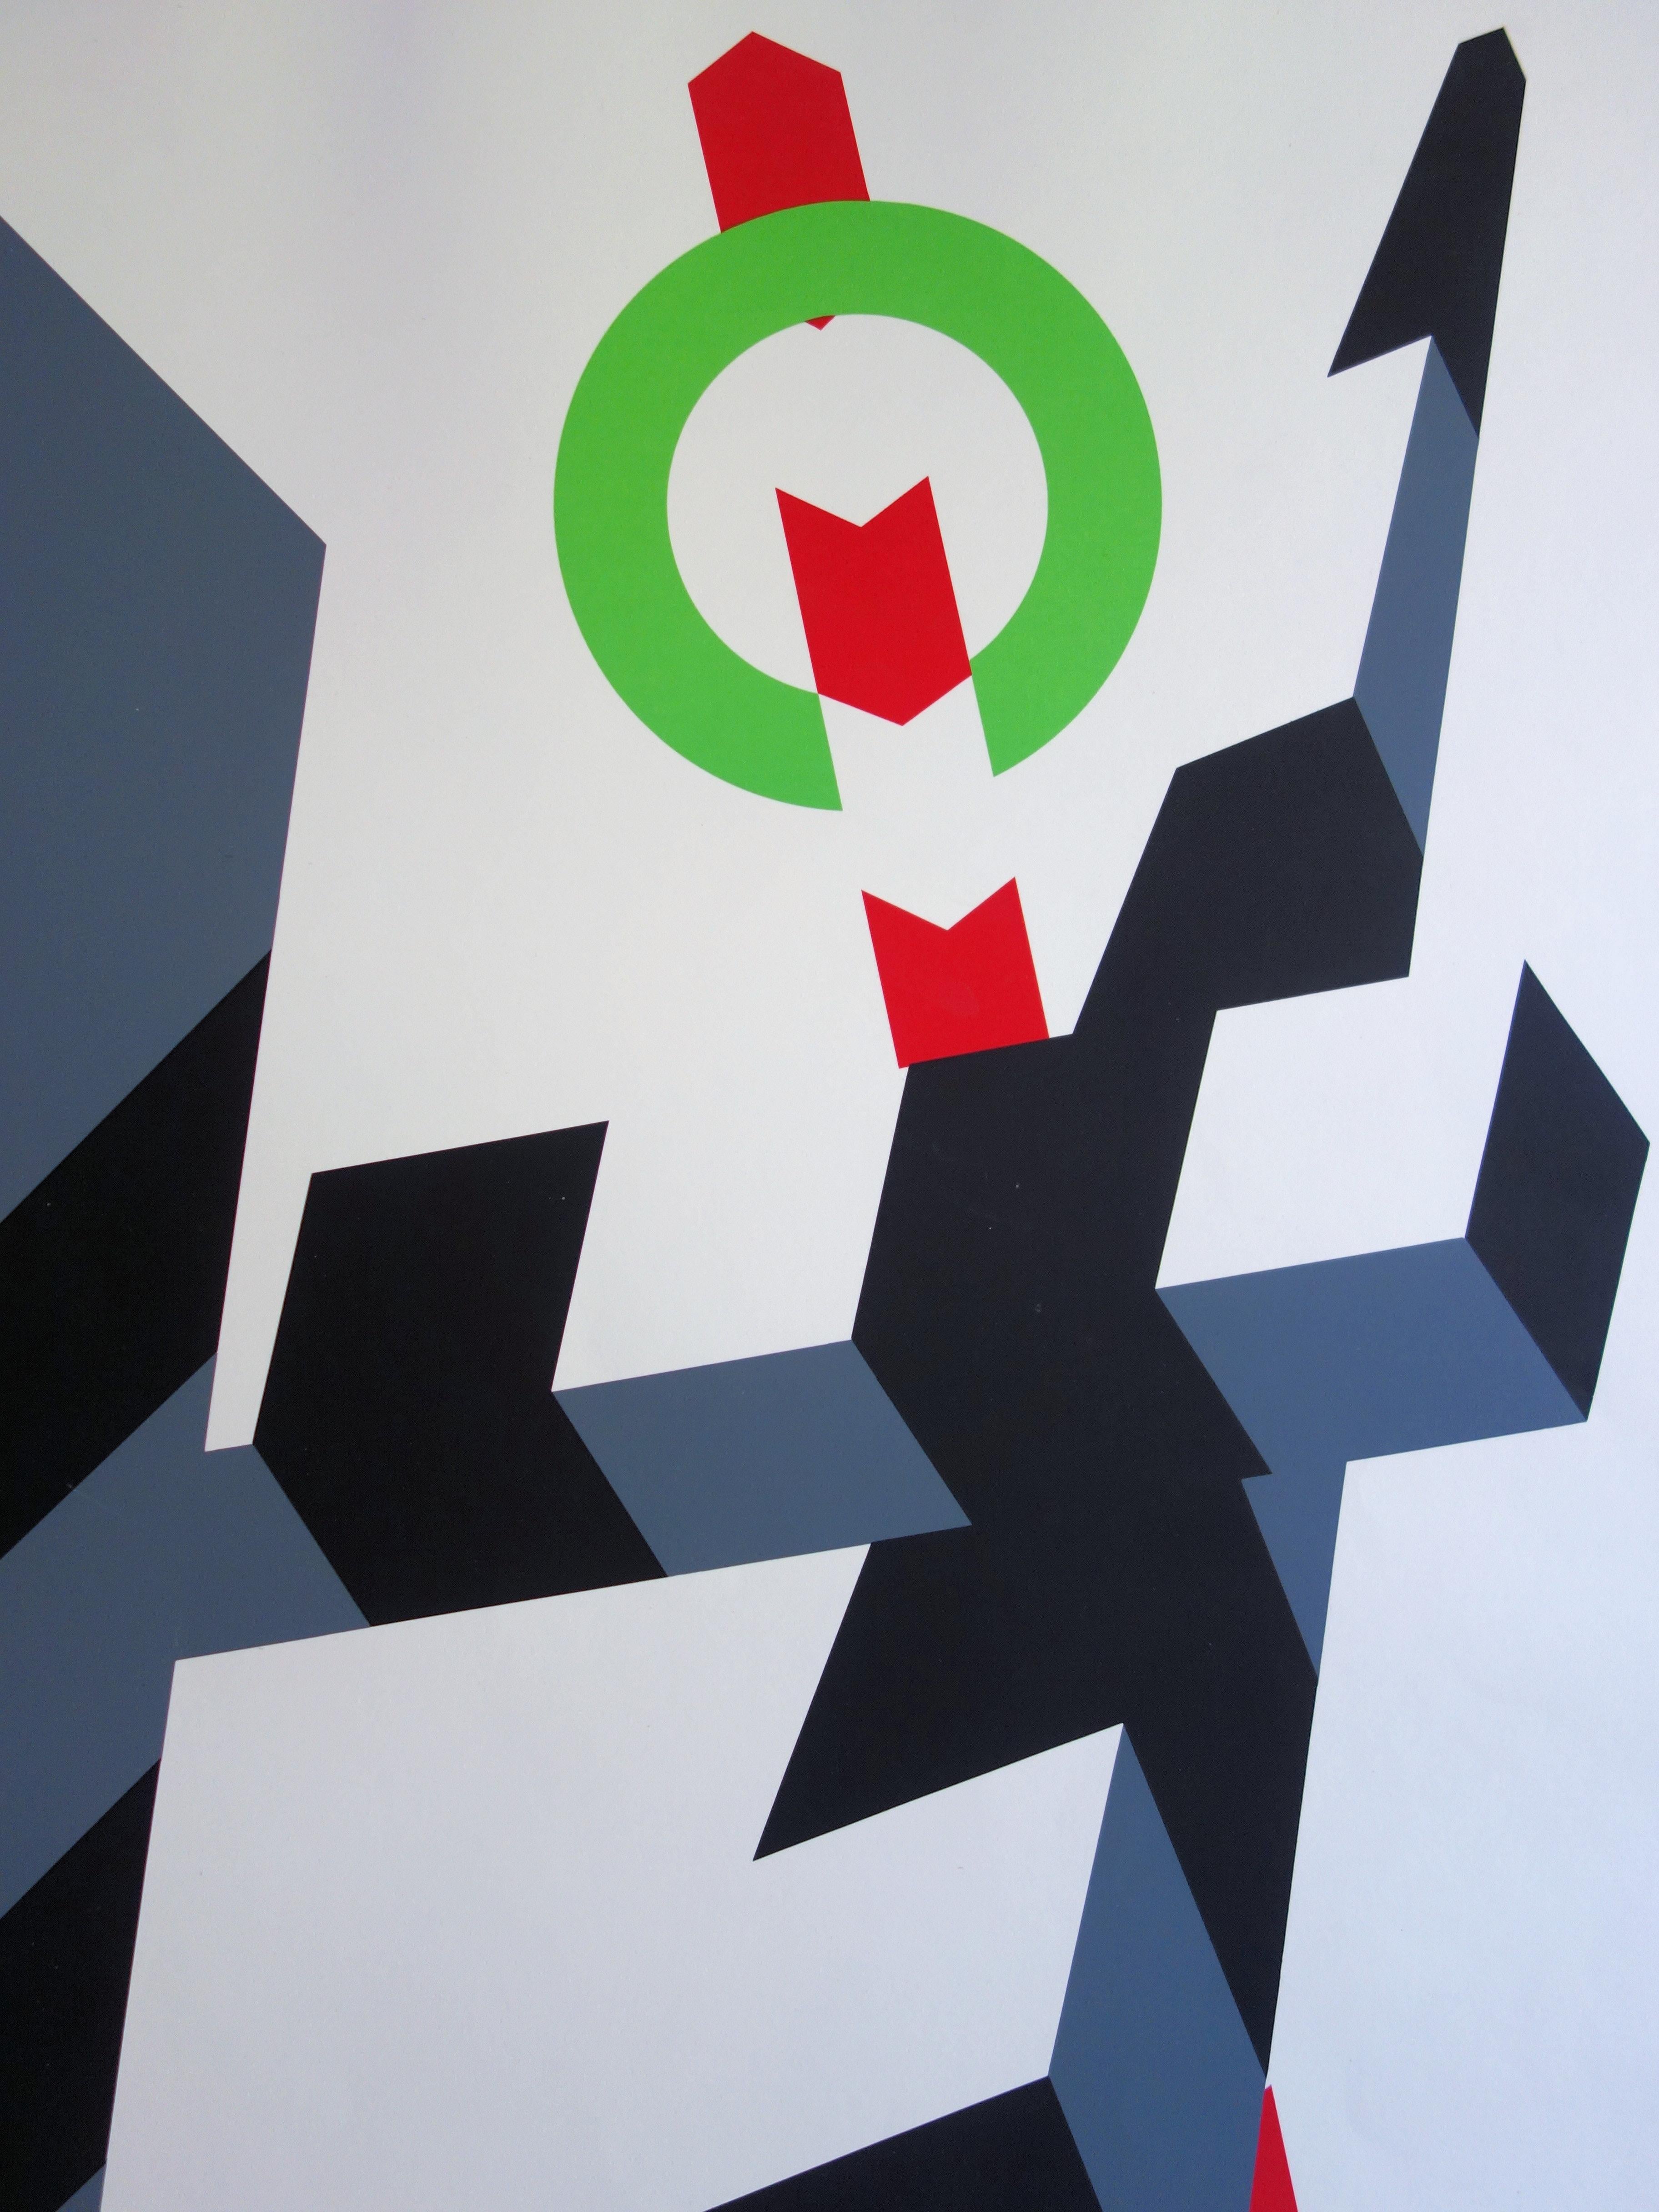 Abstract Cinetic Composition - Screenprint (Olympic Games Munich 1972) - Abstract Geometric Print by Allan D'Arcangelo